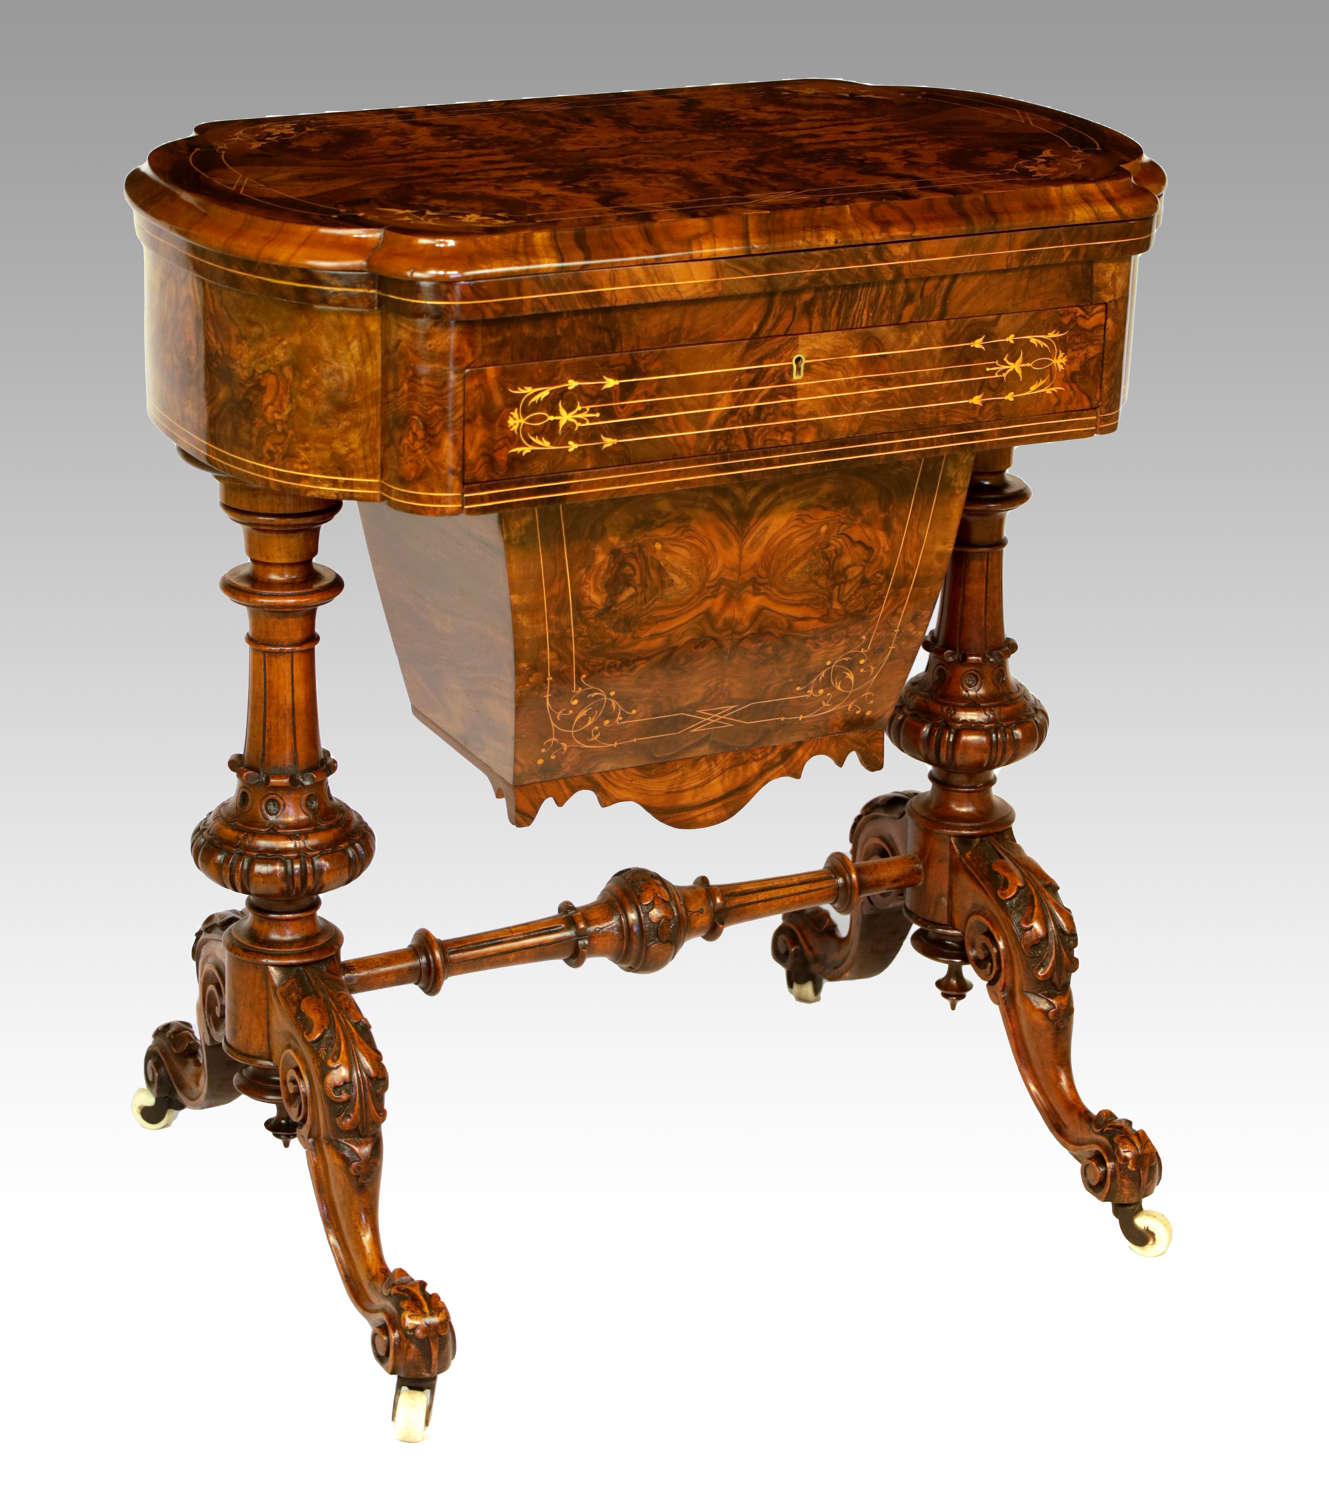 A Fine Quality Late 19th Century Burr Walnut Games/Work Table